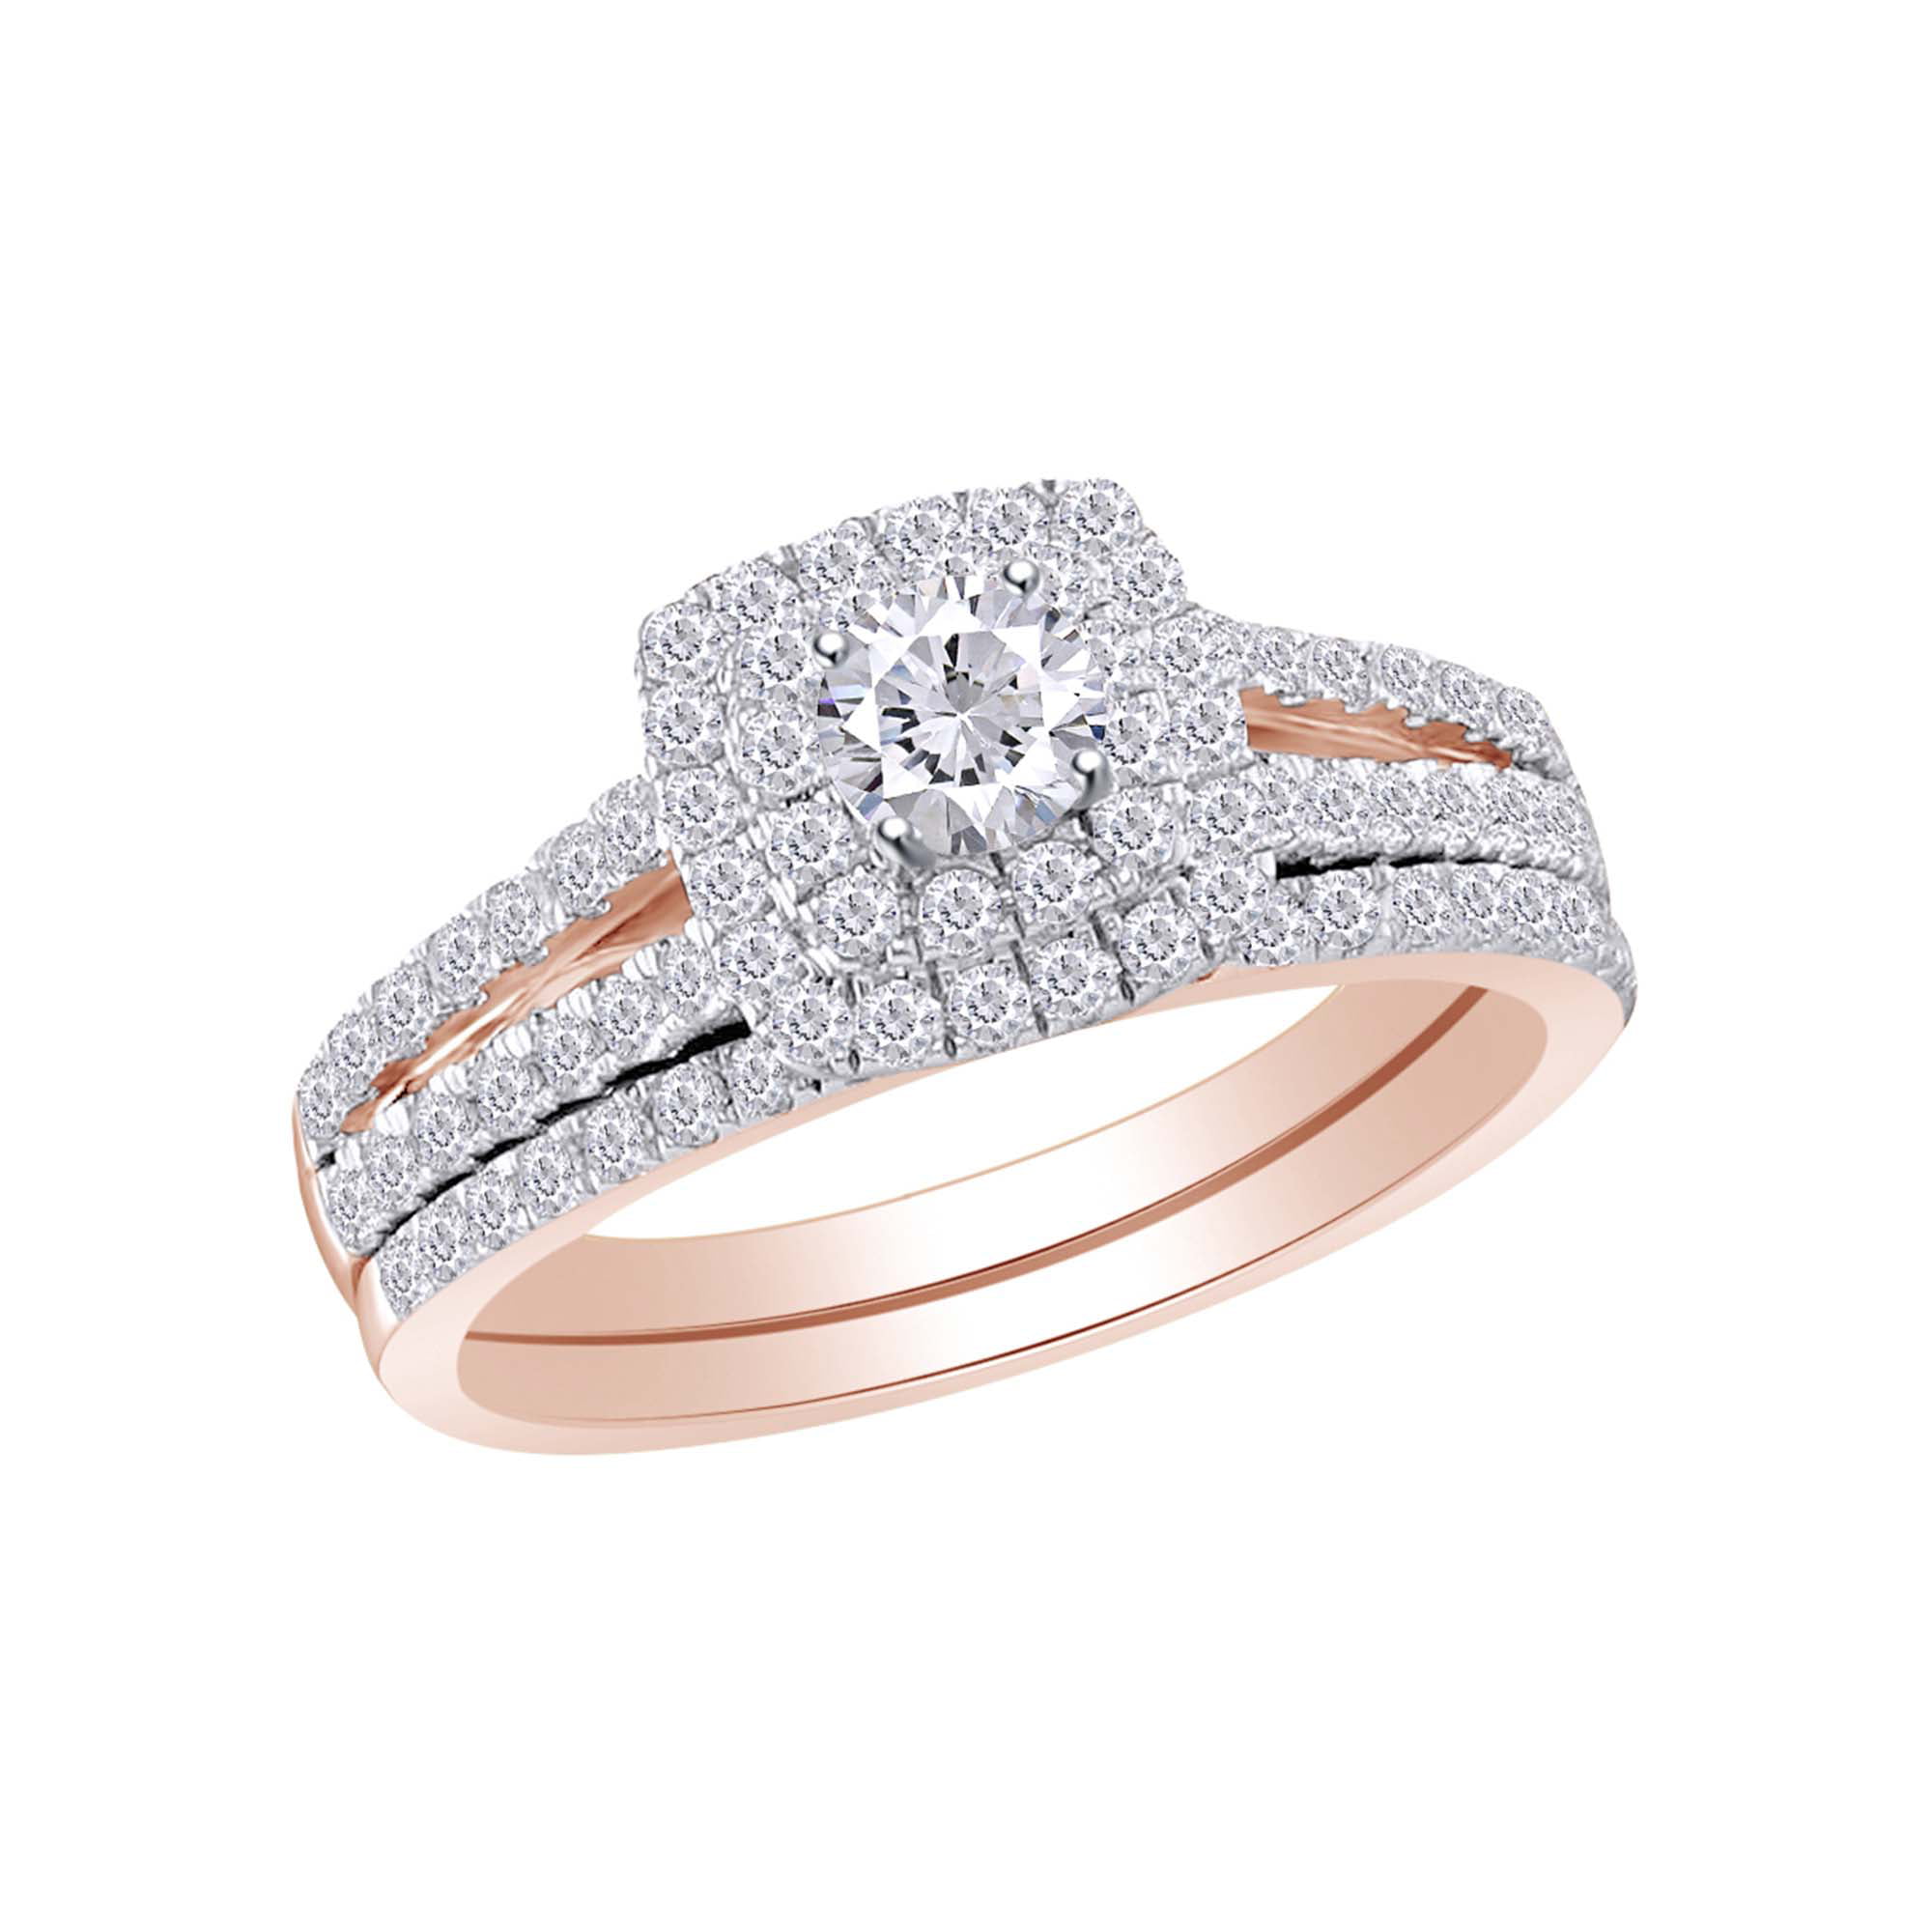 Details about   Ladies 14K Wedding Band With A Diamond 